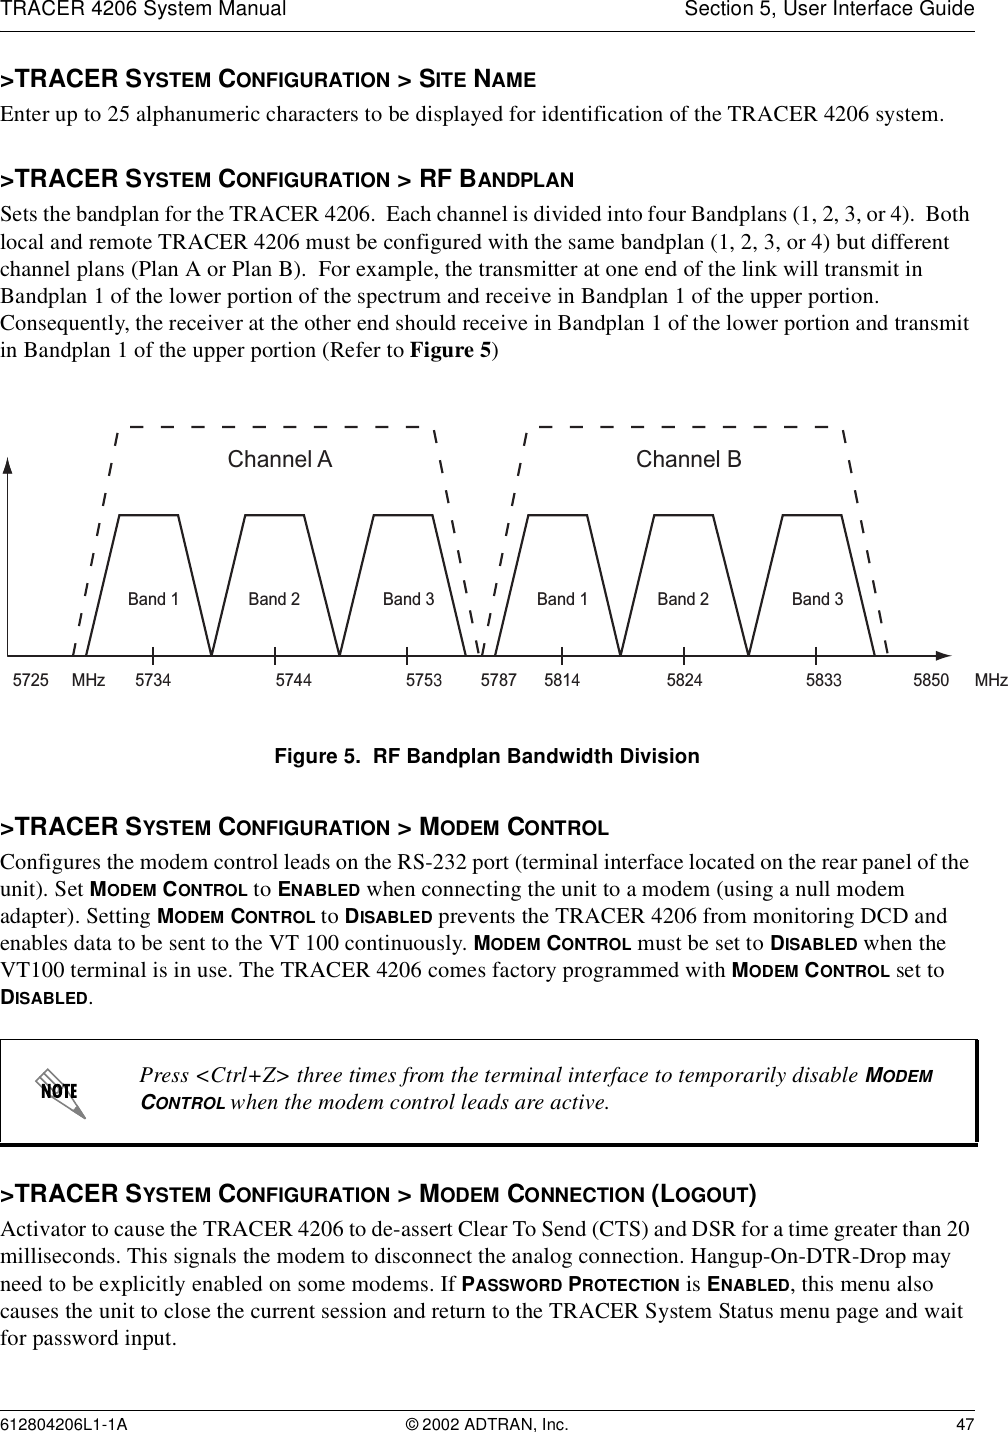 TRACER 4206 System Manual Section 5, User Interface Guide612804206L1-1A © 2002 ADTRAN, Inc. 47&gt;TRACER SYSTEM CONFIGURATION &gt; SITE NAMEEnter up to 25 alphanumeric characters to be displayed for identification of the TRACER 4206 system.&gt;TRACER SYSTEM CONFIGURATION &gt; RF BANDPLANSets the bandplan for the TRACER 4206.  Each channel is divided into four Bandplans (1, 2, 3, or 4).  Both local and remote TRACER 4206 must be configured with the same bandplan (1, 2, 3, or 4) but different channel plans (Plan A or Plan B).  For example, the transmitter at one end of the link will transmit in Bandplan 1 of the lower portion of the spectrum and receive in Bandplan 1 of the upper portion.  Consequently, the receiver at the other end should receive in Bandplan 1 of the lower portion and transmit in Bandplan 1 of the upper portion (Refer to Figure 5)Figure 5.  RF Bandplan Bandwidth Division&gt;TRACER SYSTEM CONFIGURATION &gt; MODEM CONTROLConfigures the modem control leads on the RS-232 port (terminal interface located on the rear panel of the unit). Set MODEM CONTROL to ENABLED when connecting the unit to a modem (using a null modem adapter). Setting MODEM CONTROL to DISABLED prevents the TRACER 4206 from monitoring DCD and enables data to be sent to the VT 100 continuously. MODEM CONTROL must be set to DISABLED when the VT100 terminal is in use. The TRACER 4206 comes factory programmed with MODEM CONTROL set to DISABLED.&gt;TRACER SYSTEM CONFIGURATION &gt; MODEM CONNECTION (LOGOUT)Activator to cause the TRACER 4206 to de-assert Clear To Send (CTS) and DSR for a time greater than 20 milliseconds. This signals the modem to disconnect the analog connection. Hangup-On-DTR-Drop may need to be explicitly enabled on some modems. If PASSWORD PROTECTION is ENABLED, this menu also causes the unit to close the current session and return to the TRACER System Status menu page and wait for password input.Press &lt;Ctrl+Z&gt; three times from the terminal interface to temporarily disable MODEM CONTROL when the modem control leads are active.Channel A57345725 5787 585057445753MHz MHzBand 3Band 2Band 1Channel B581458245833Band 3Band 2Band 1